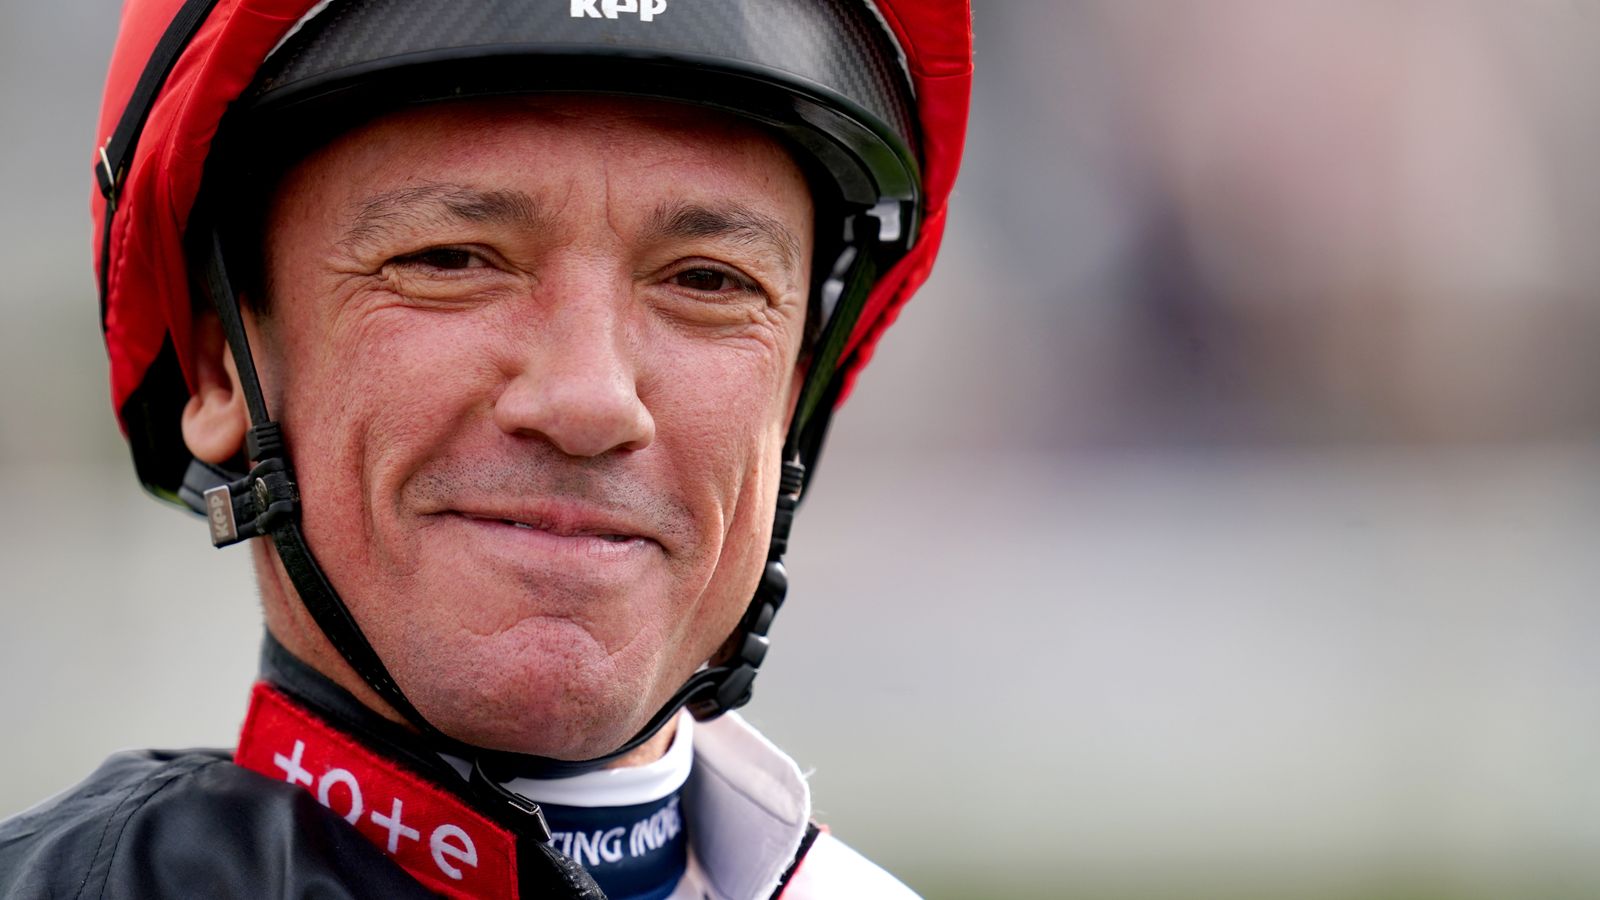 Cazoo Derby: Frankie Dettori booked for Piz Badile ride at Epsom Downs replacing Gavin Ryan for trainer Donnacha O'Brien